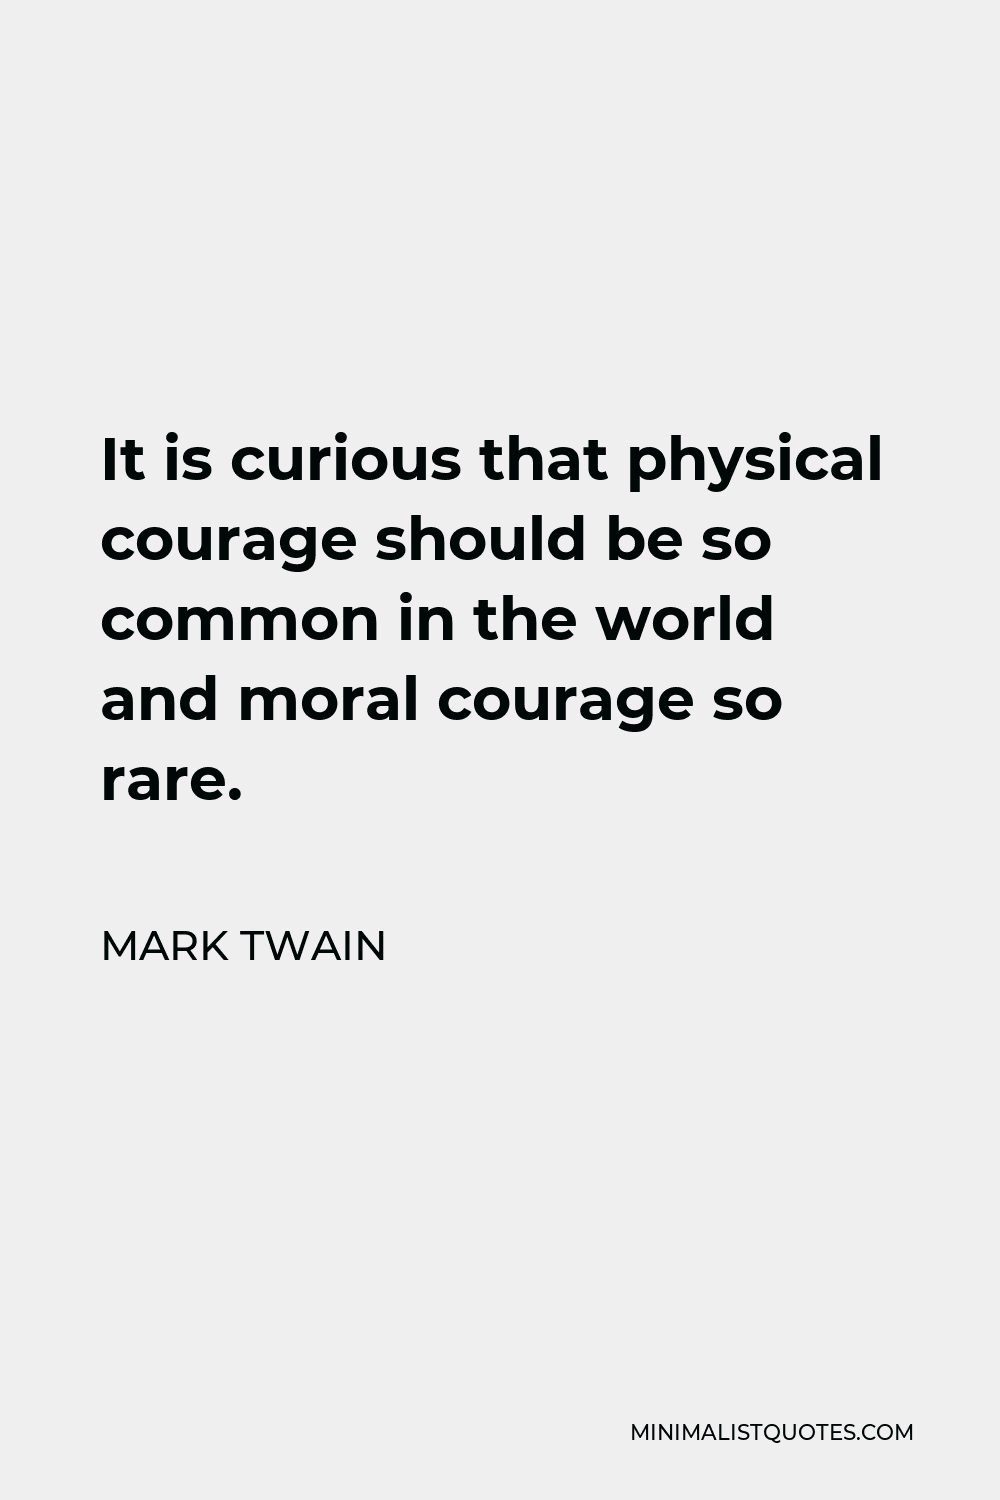 Mark Twain Quote - It is curious that physical courage should be so common in the world and moral courage so rare.